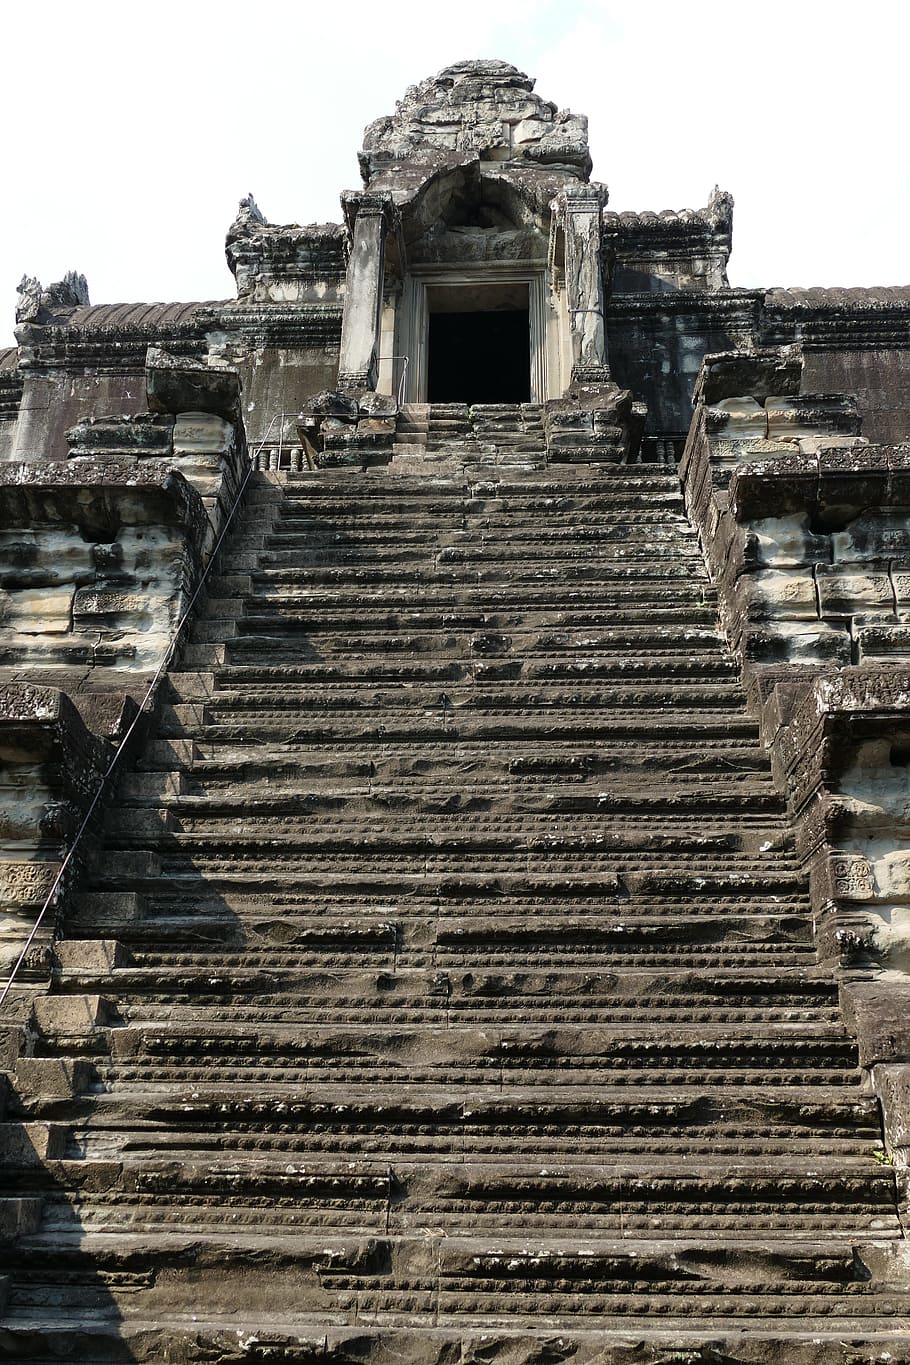 Angkor Wat, Cambodia, Temple, angkor, asia, temple complex, historically, architecture, unesco, world heritage